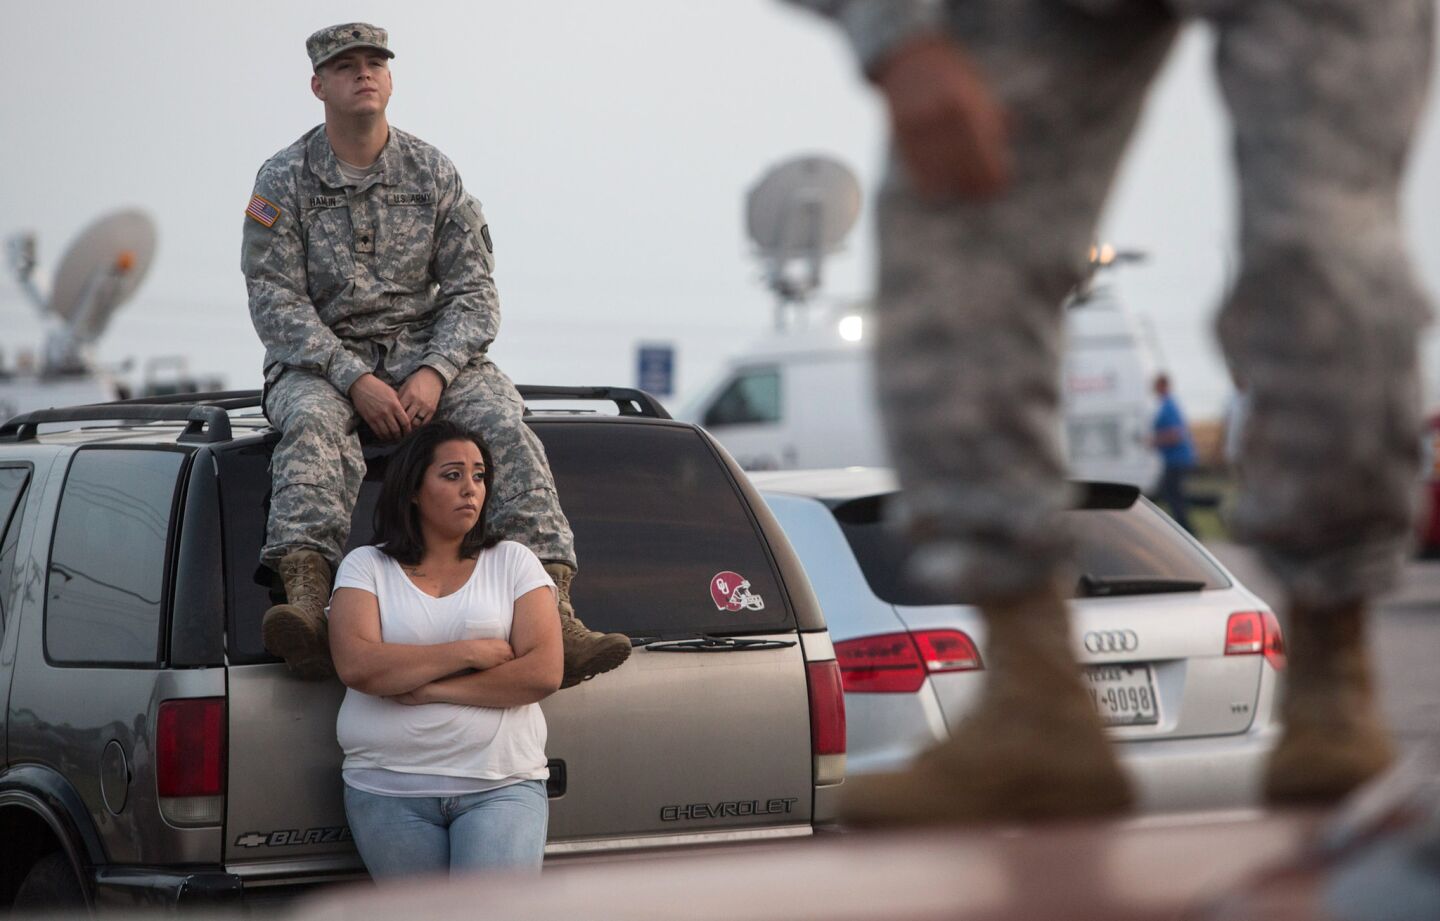 Lucy Hamlin and her husband, Spc. Timothy Hamlin, wait for permission to reenter Ft. Hood, where they live.